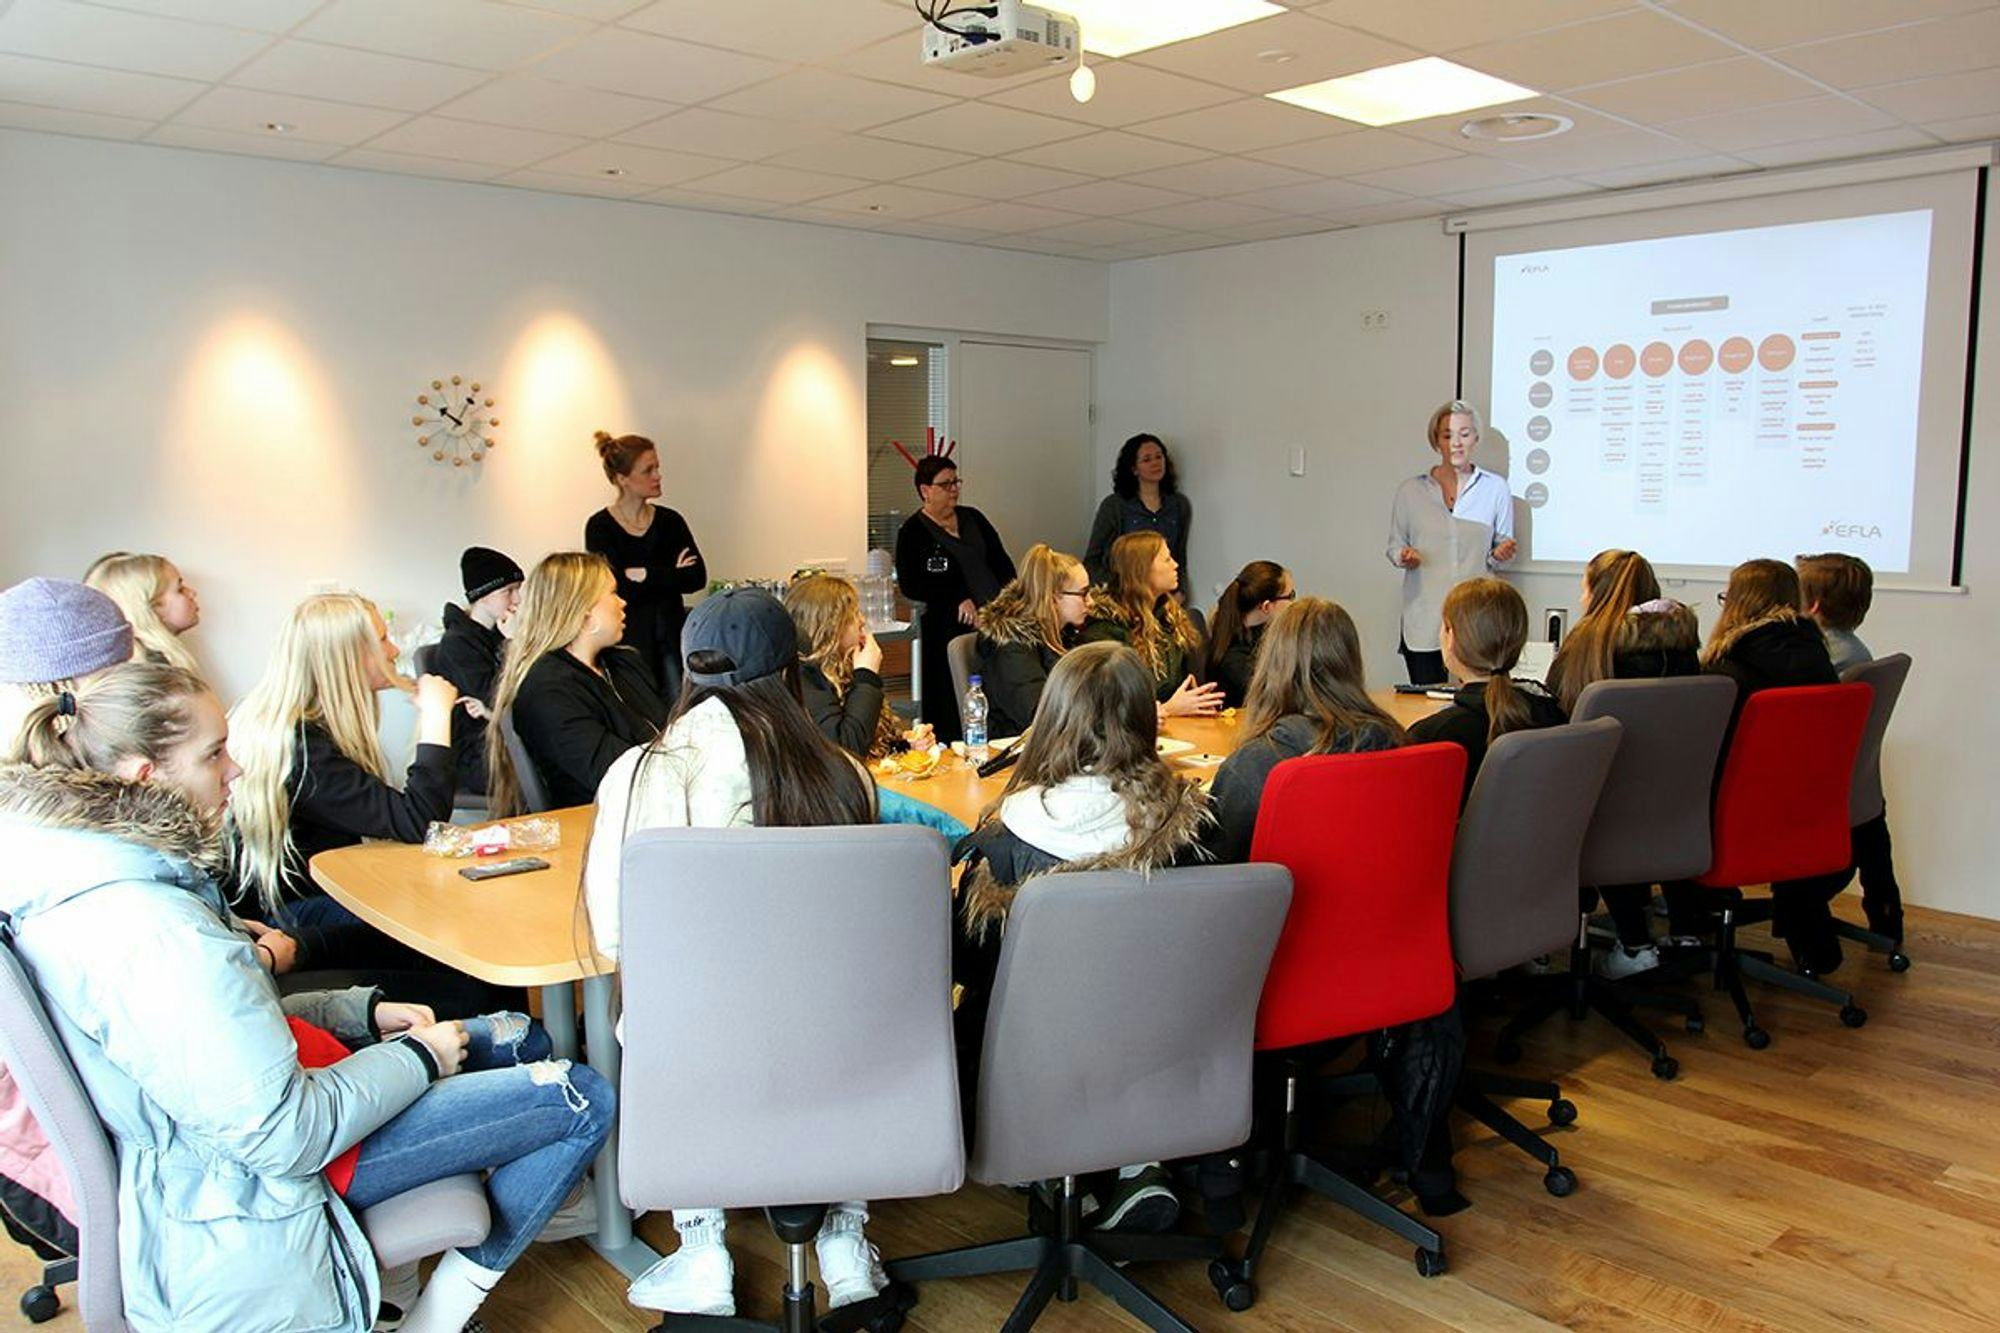 A woman giving presentation to a room full of young girls.